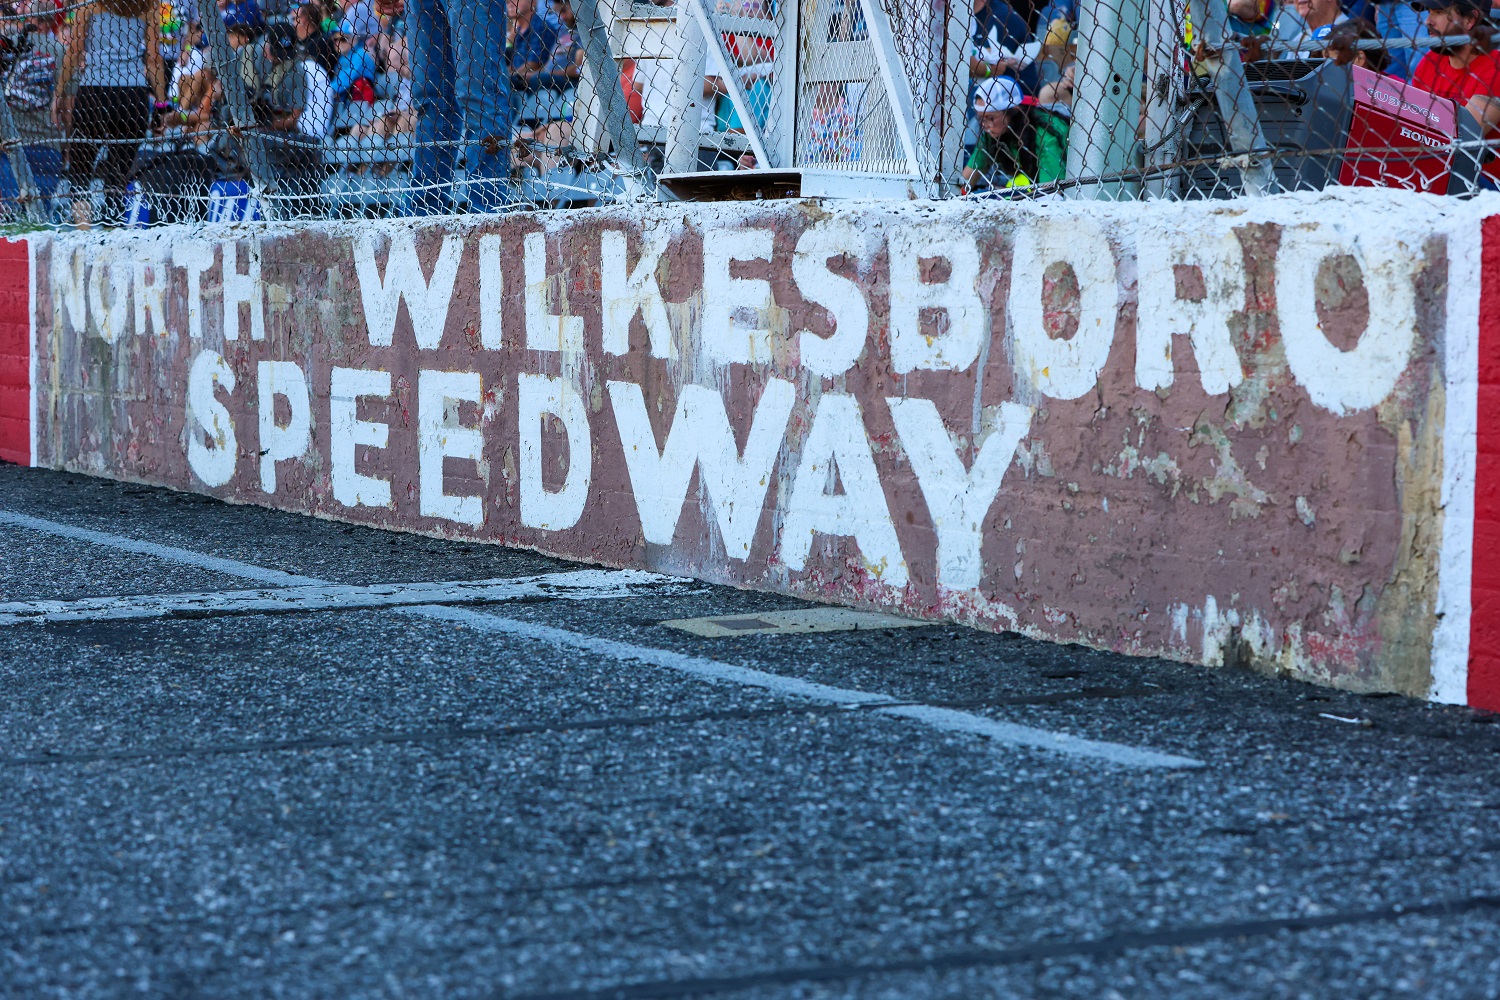 Putting the All-Star Race in North Wilkesboro Is an Inspired NASCAR Move Negating the Chicago Mistake